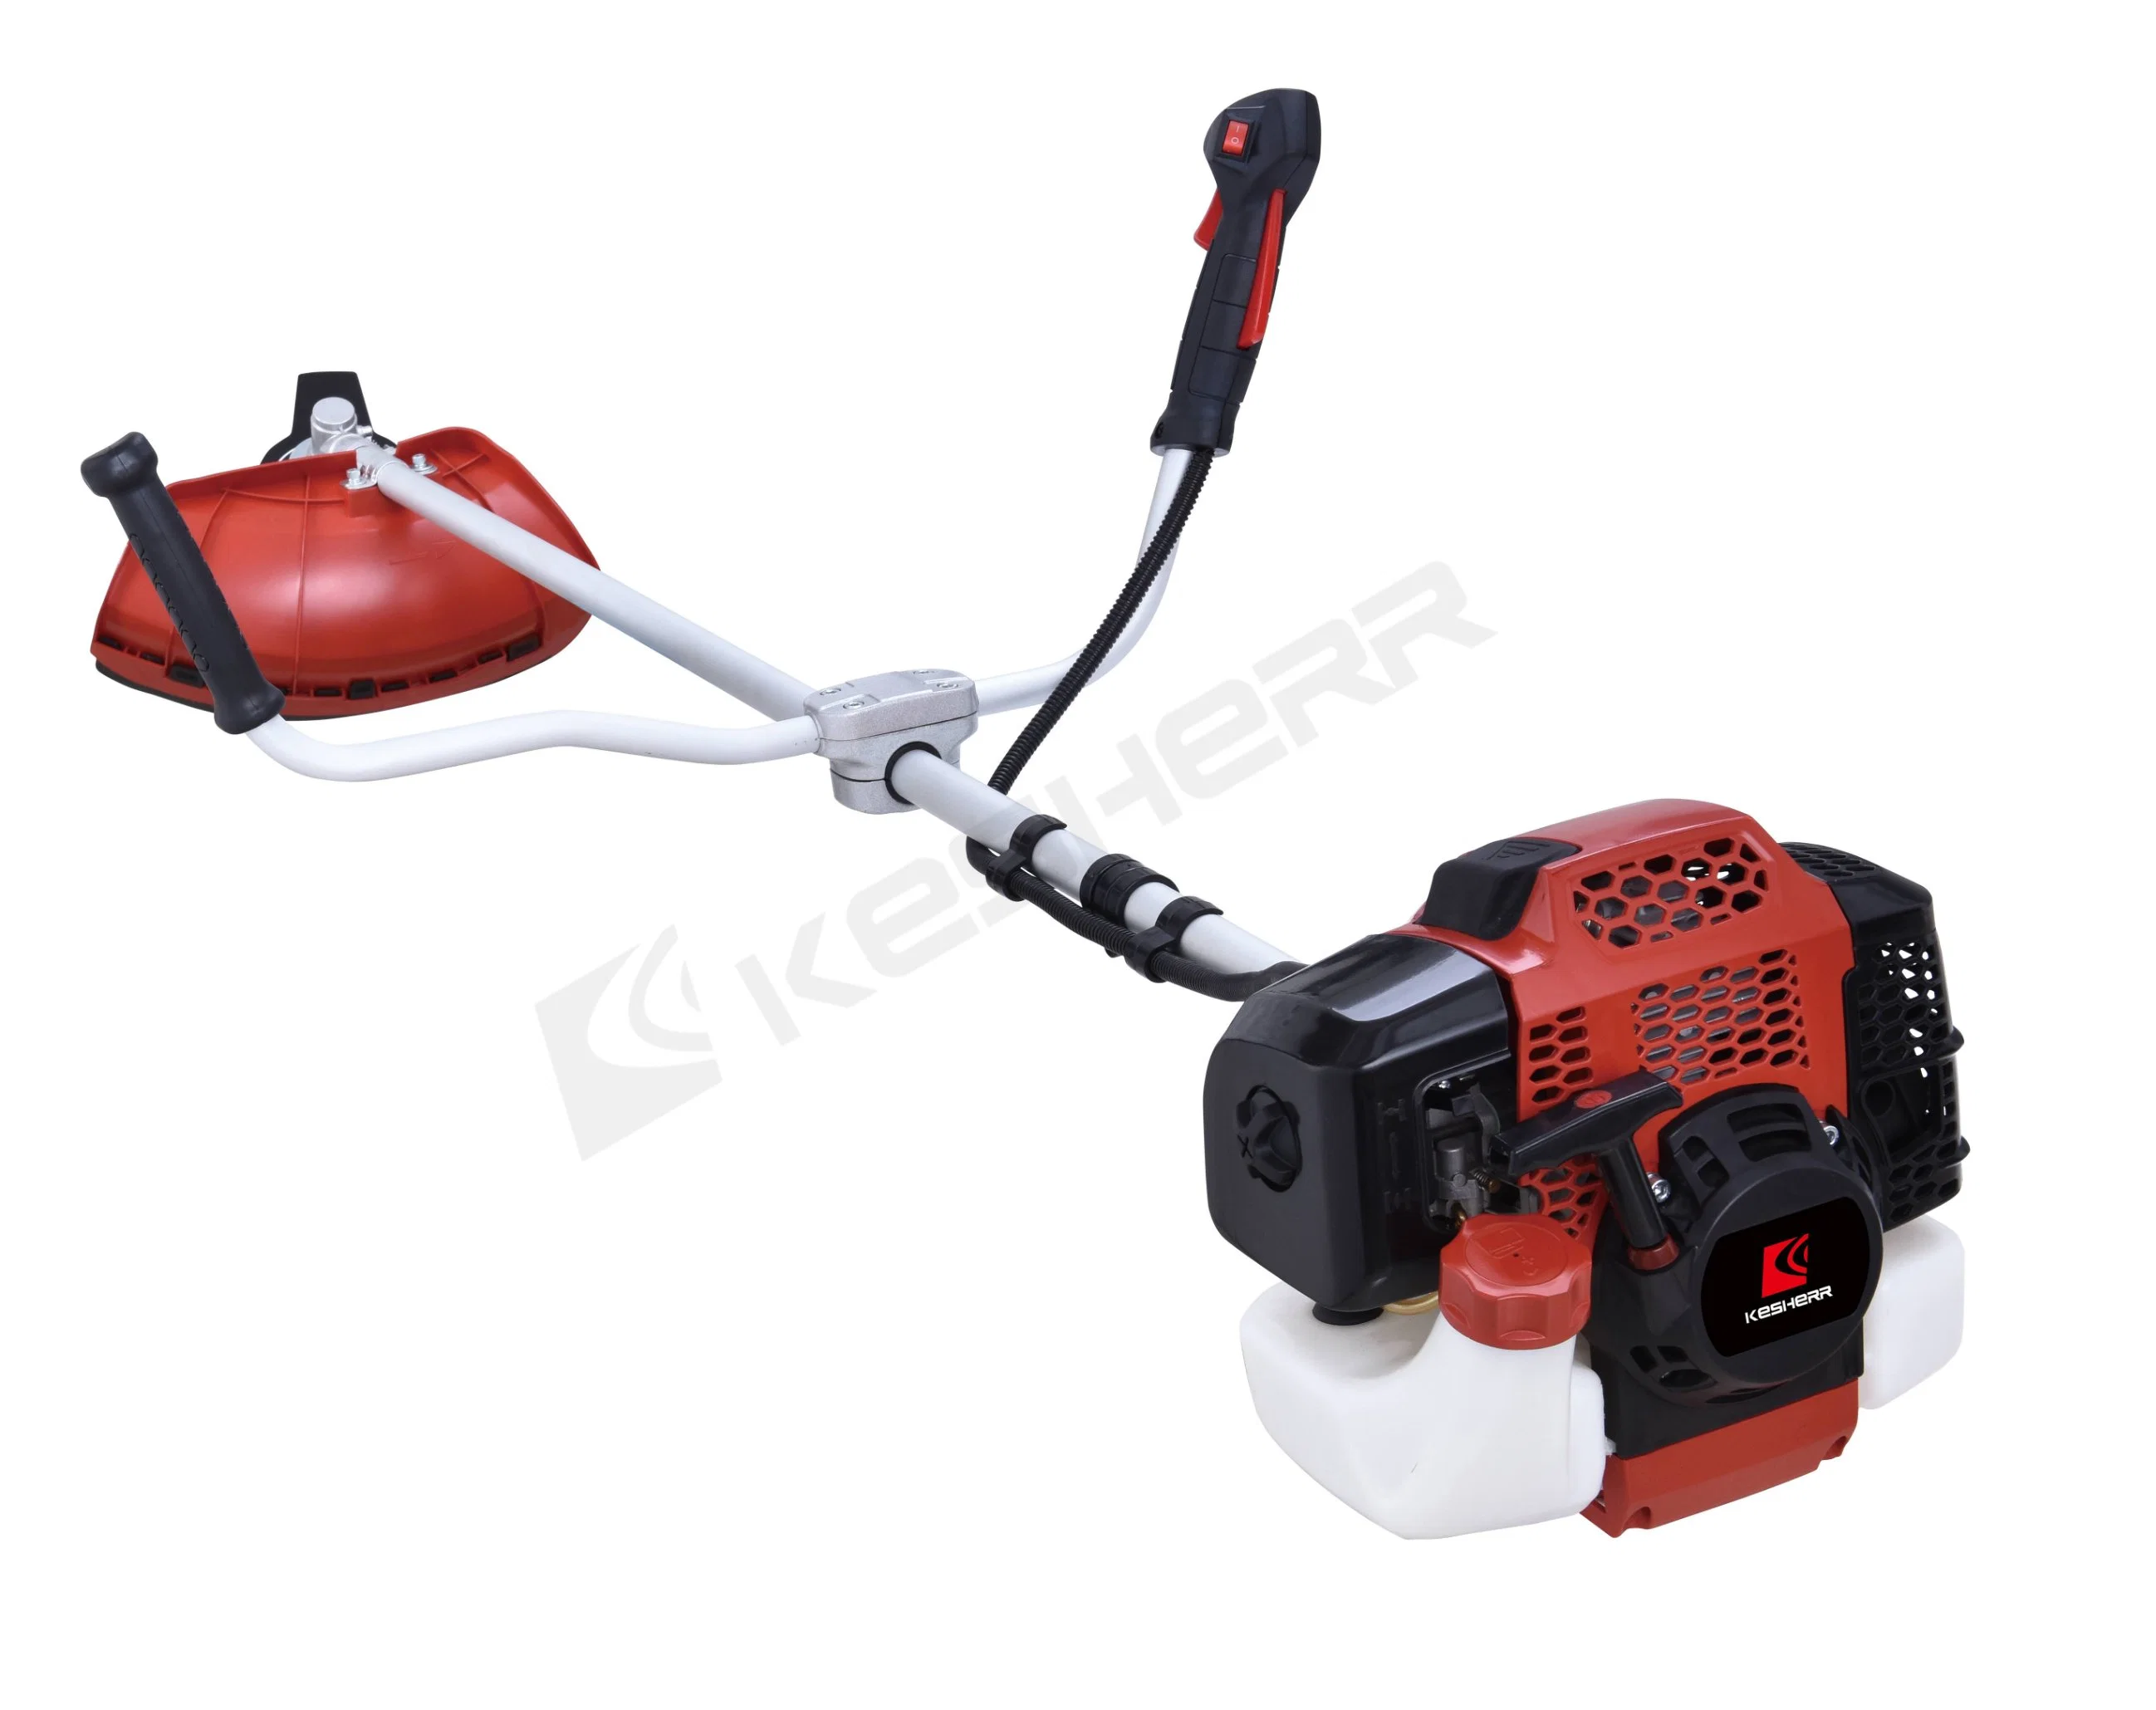 Garden Machinery 2-Cycle Gas Brushcutter and Dual Line Trimmer, Grass Trimmer, Weed Eater